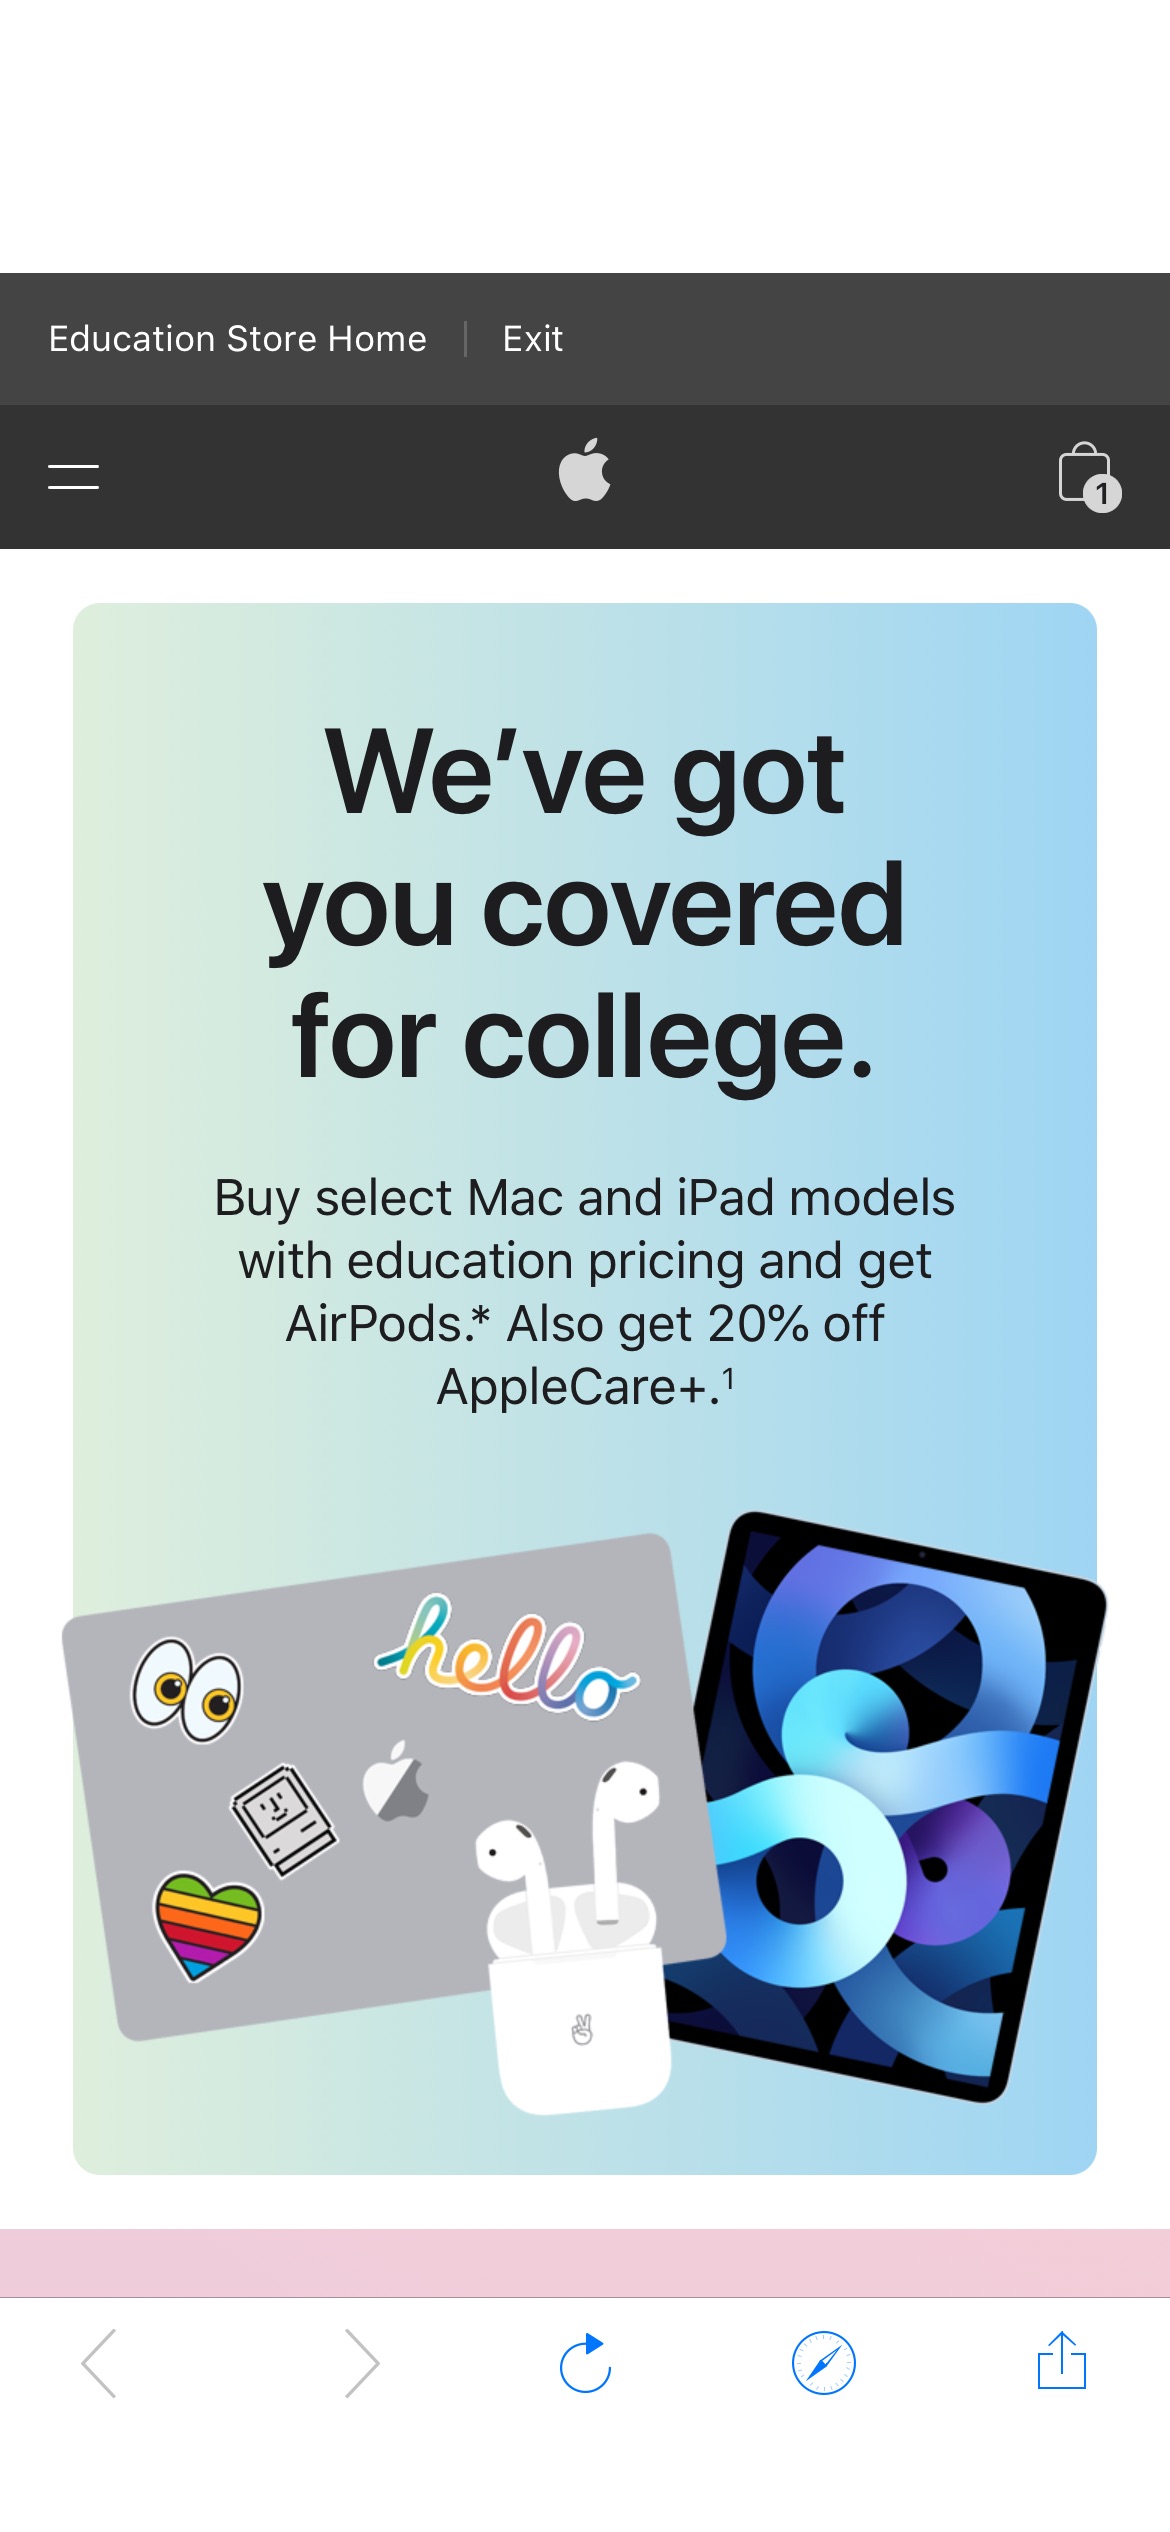 Back to School - Student Discounts - Education - Apple

买Apple 指定产品送airbuds